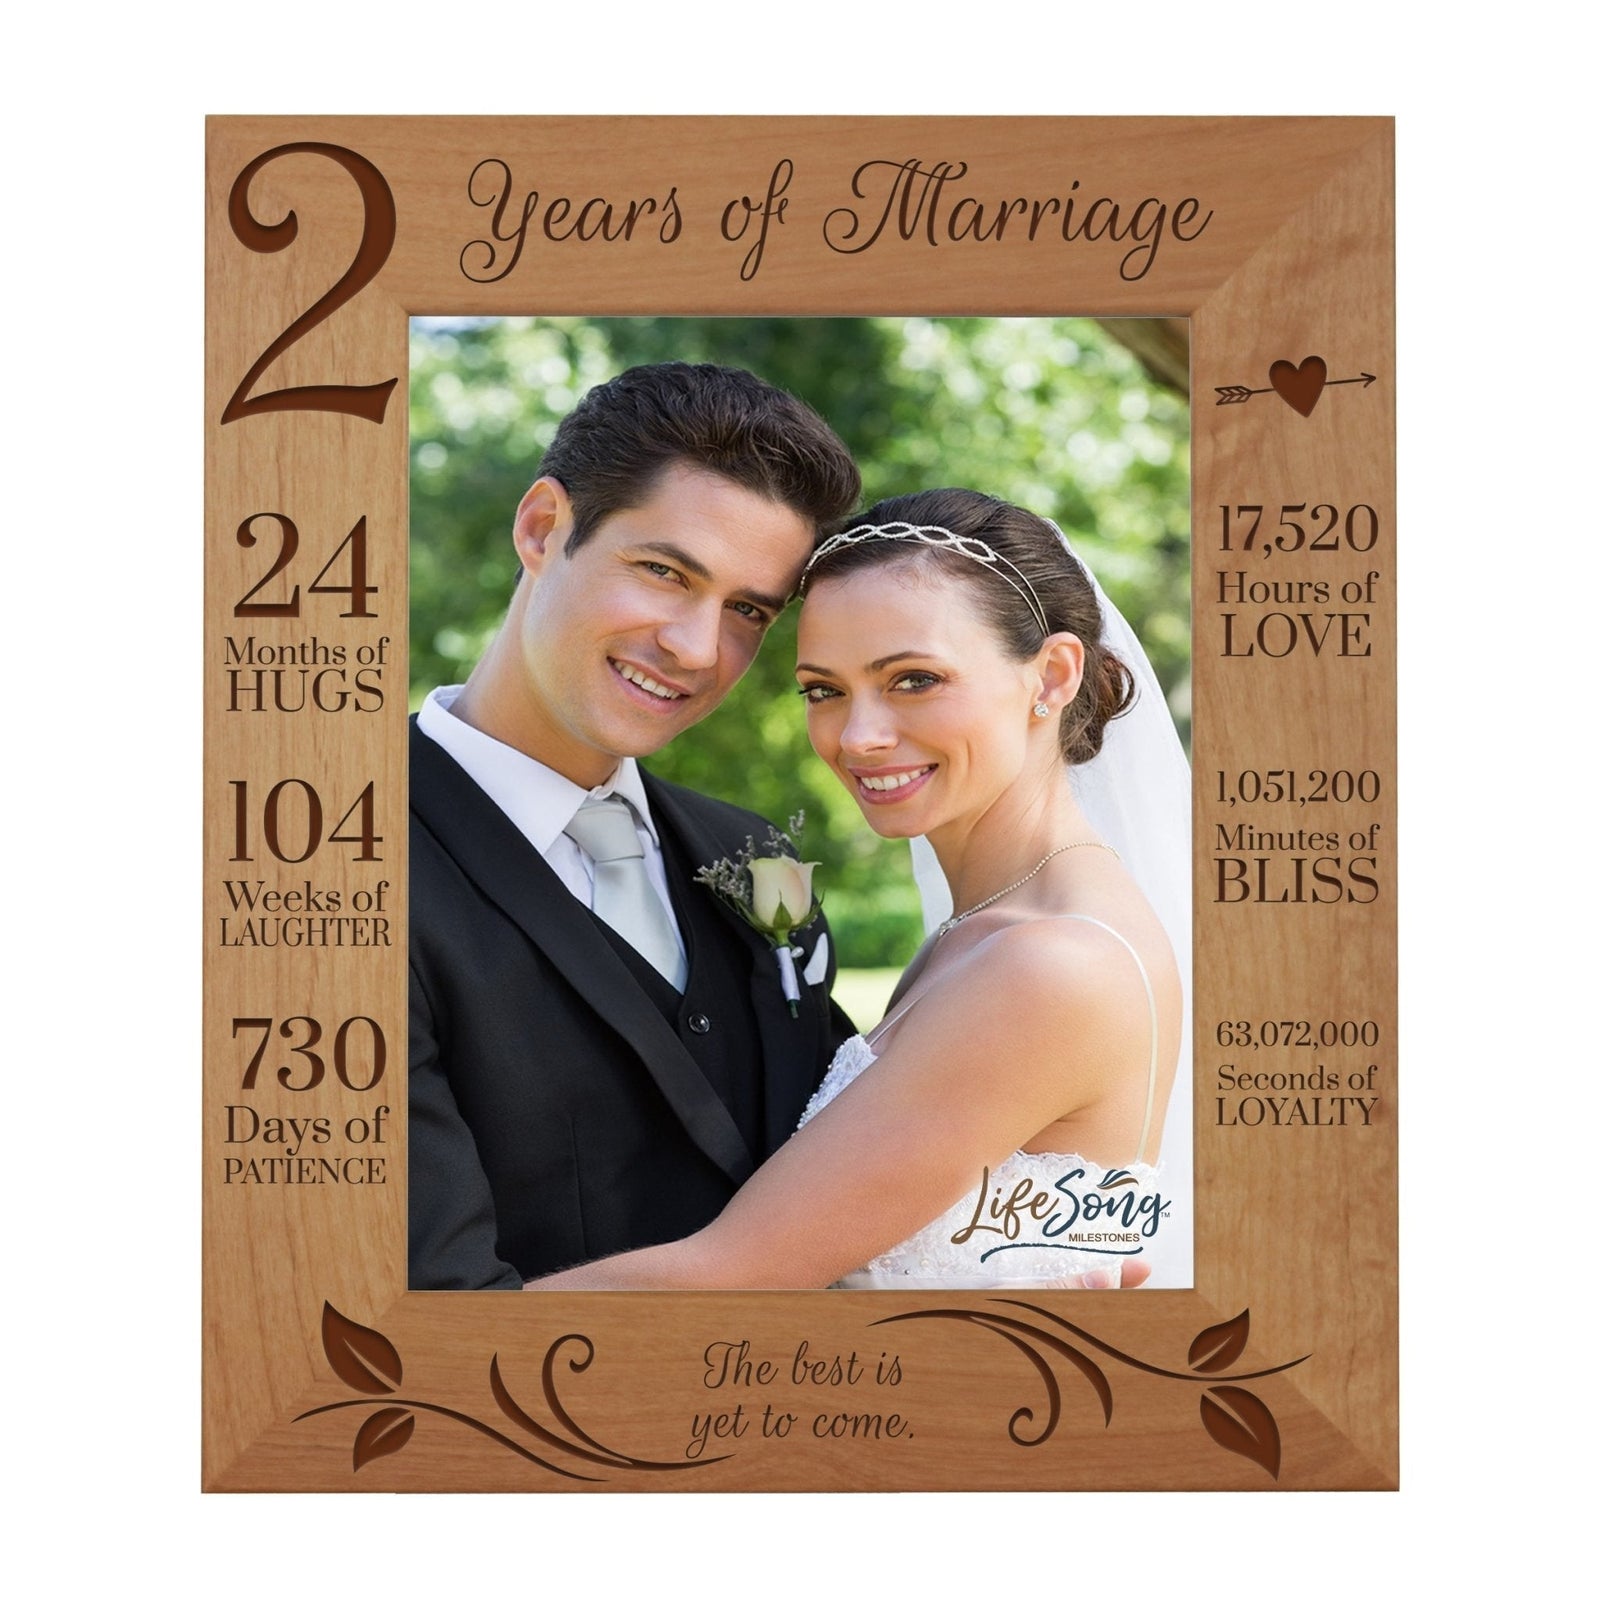 Couples 2nd Wedding Anniversary Photo Frame Home Decor Gift Ideas - The Best Is Yet To Come - LifeSong Milestones